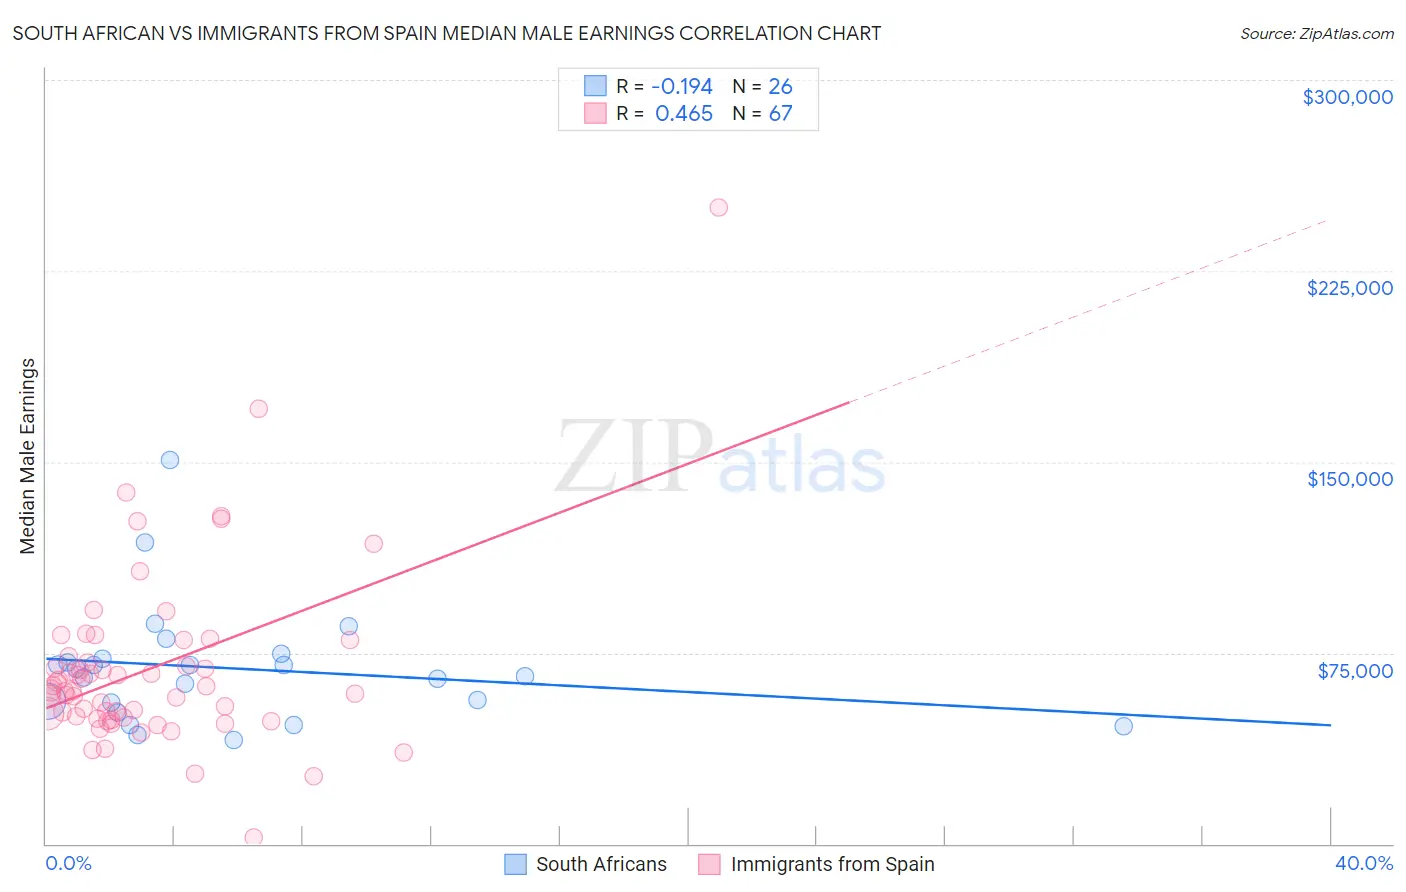 South African vs Immigrants from Spain Median Male Earnings